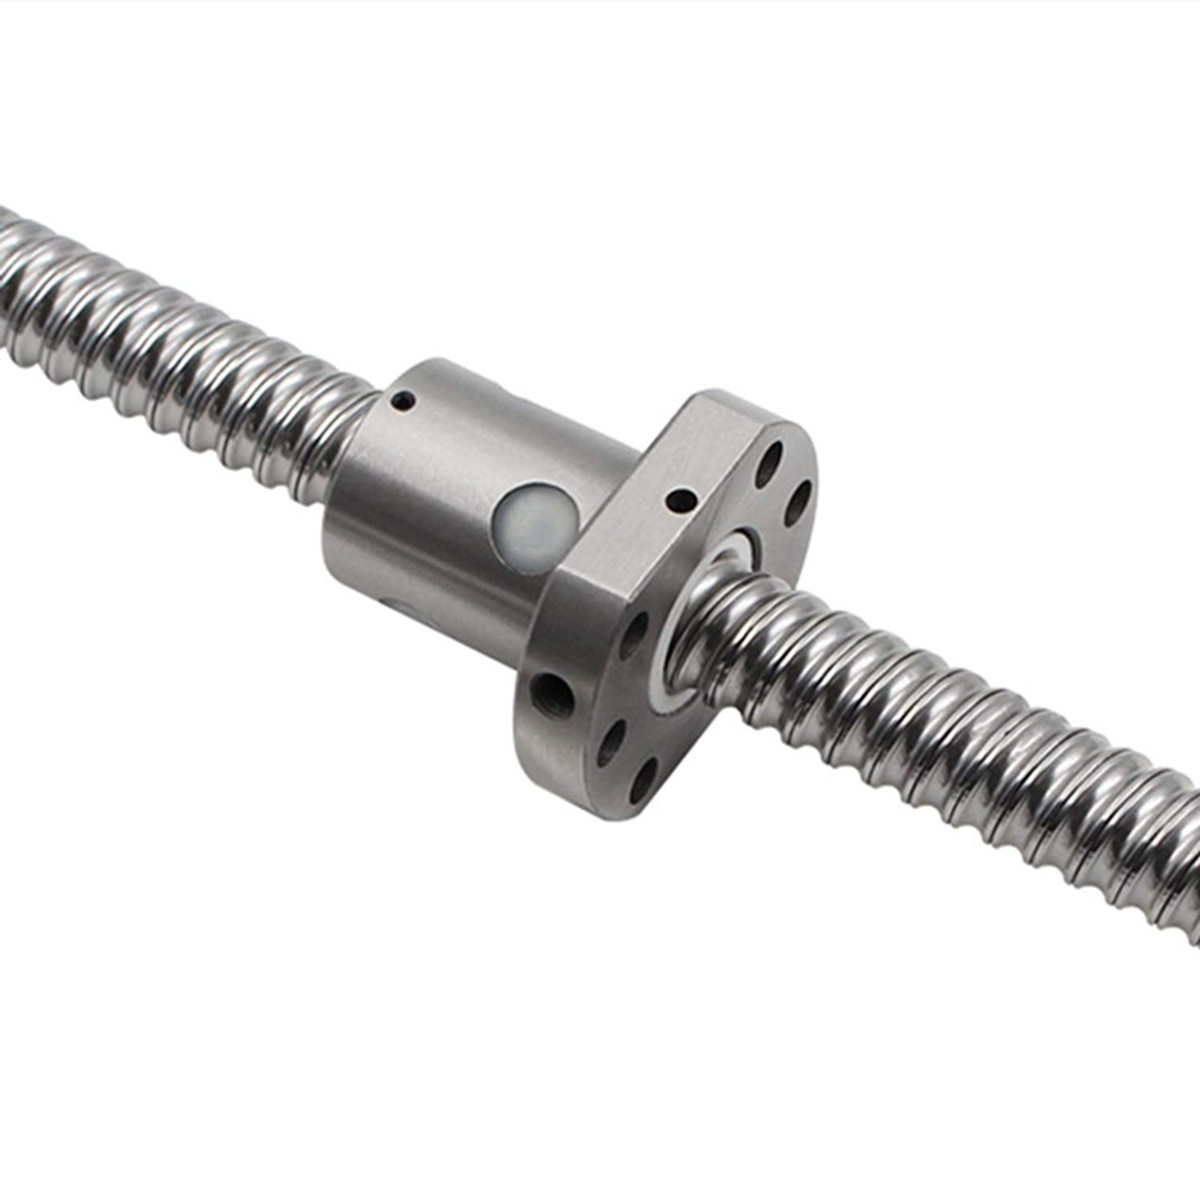 Machifit-SFU1204-300-650mm-Ball-Screw-with-BK-BF10-End-Supports-635x8mm-Coupler-for-CNC-1916612-3